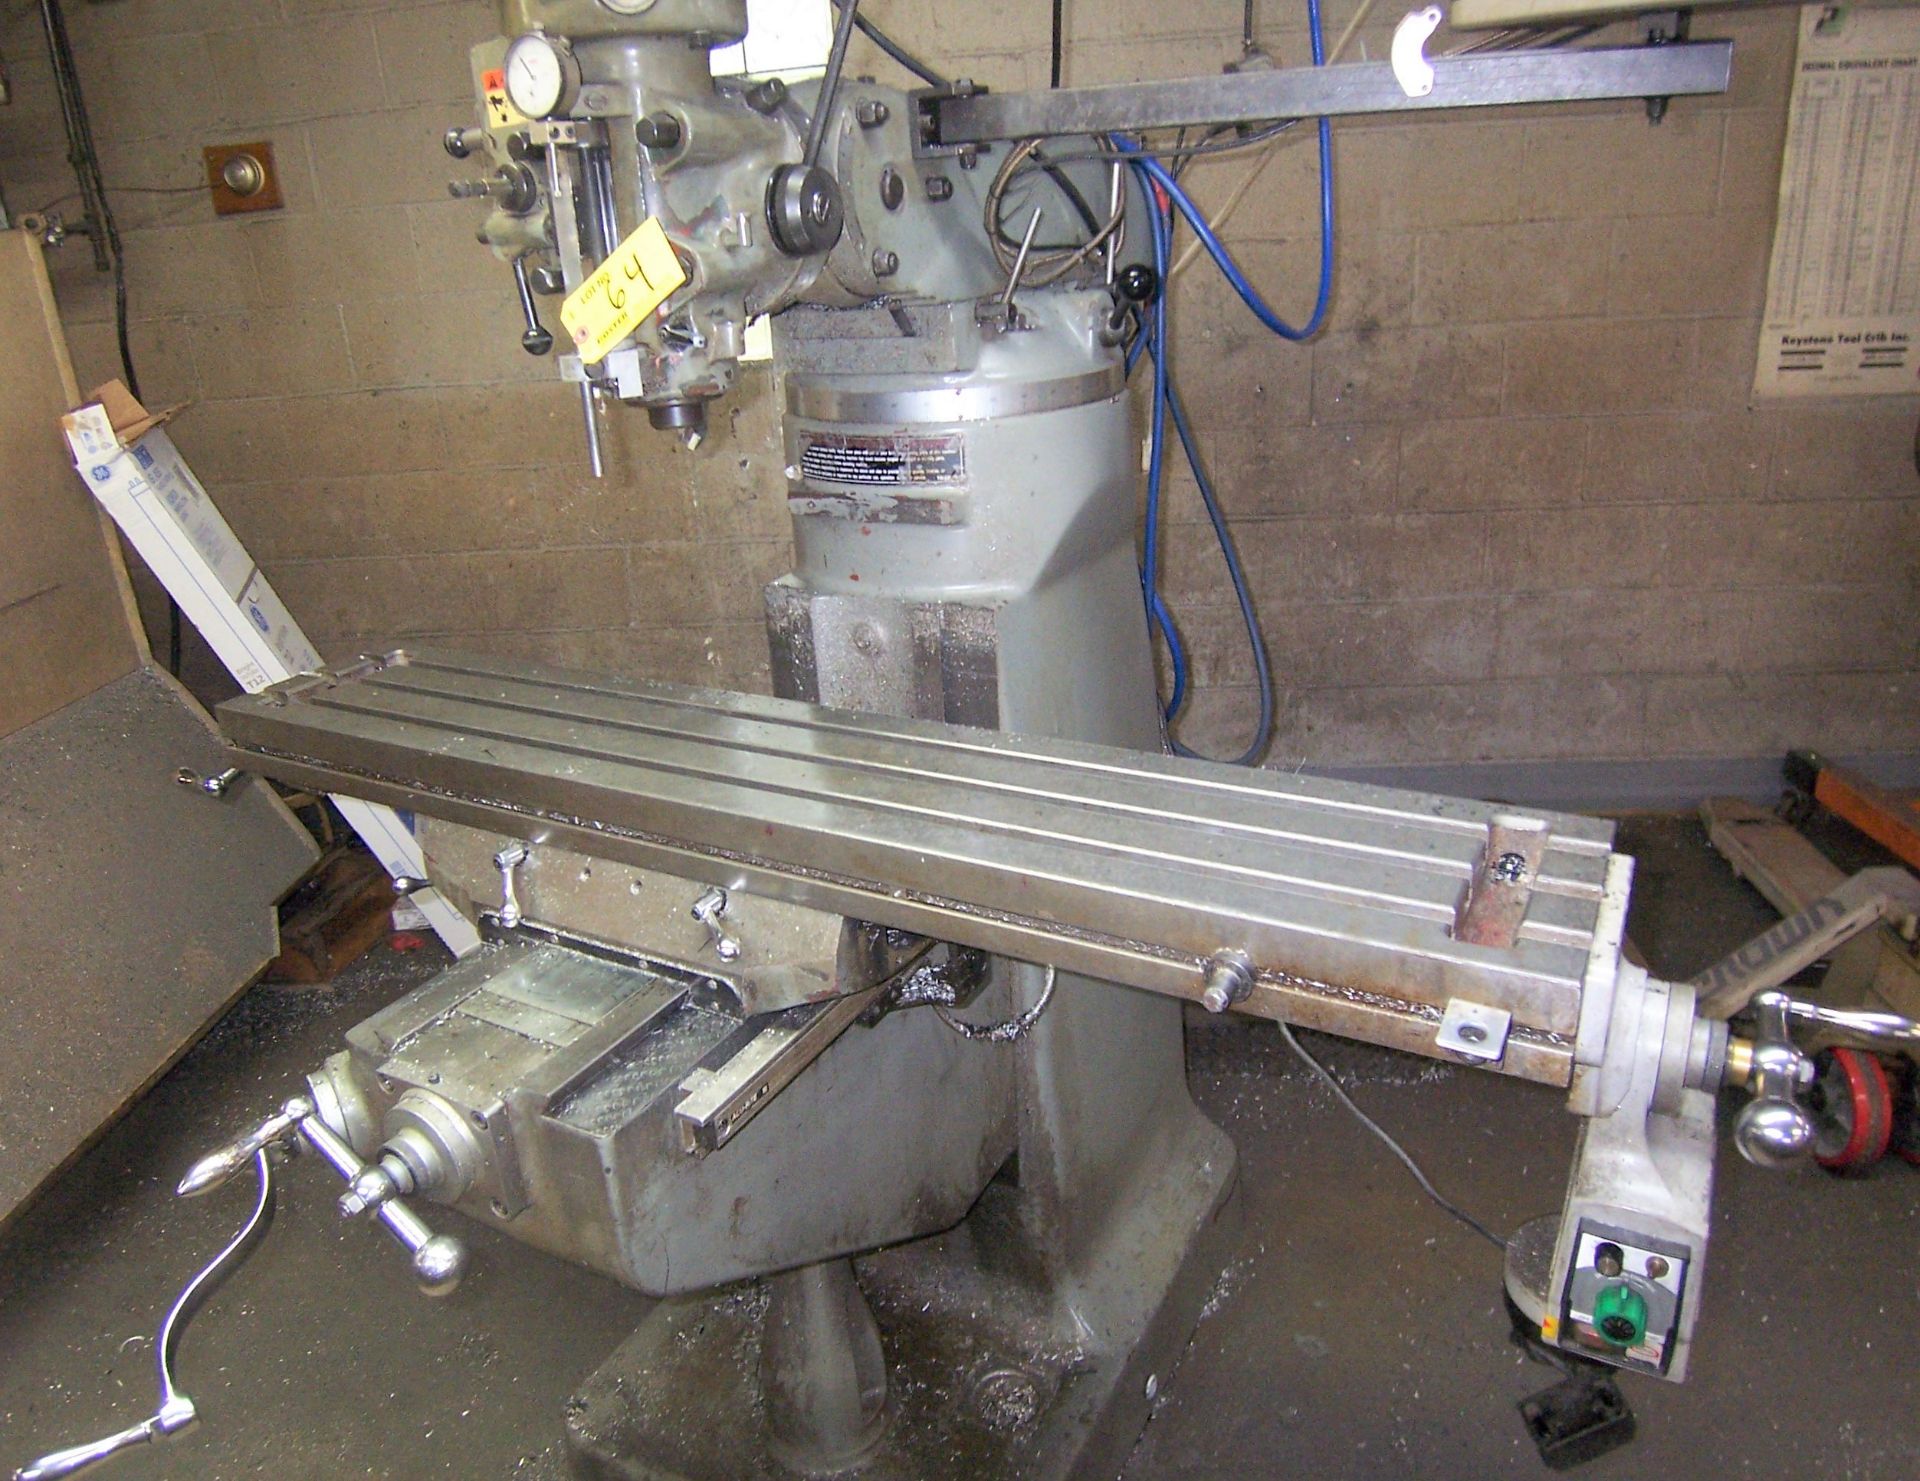 SHARP 3HP VARI-SPEED VERTICAL MILLING MACHINE WITH 9" X 50" POWER FEED TABLE, SPINDLE SPEEDS TO 4, - Image 3 of 4